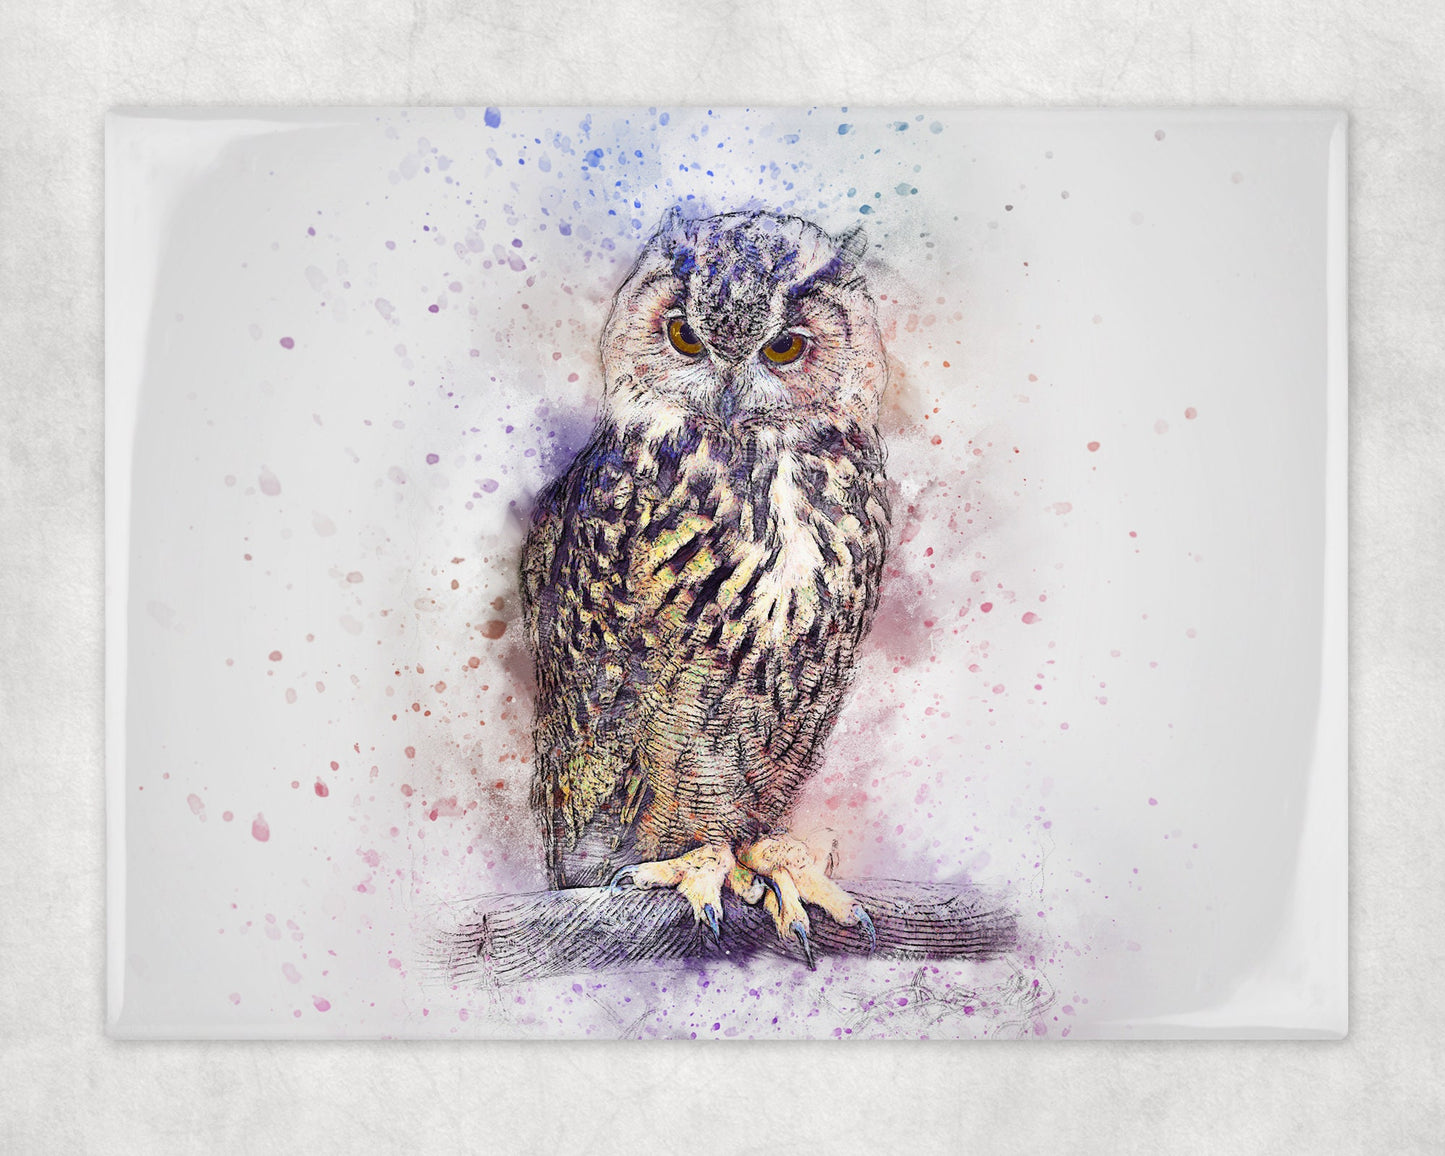 Watercolor Style Owl Art Decorative Ceramic Tile with Optional Easel Back - 6x8 inches